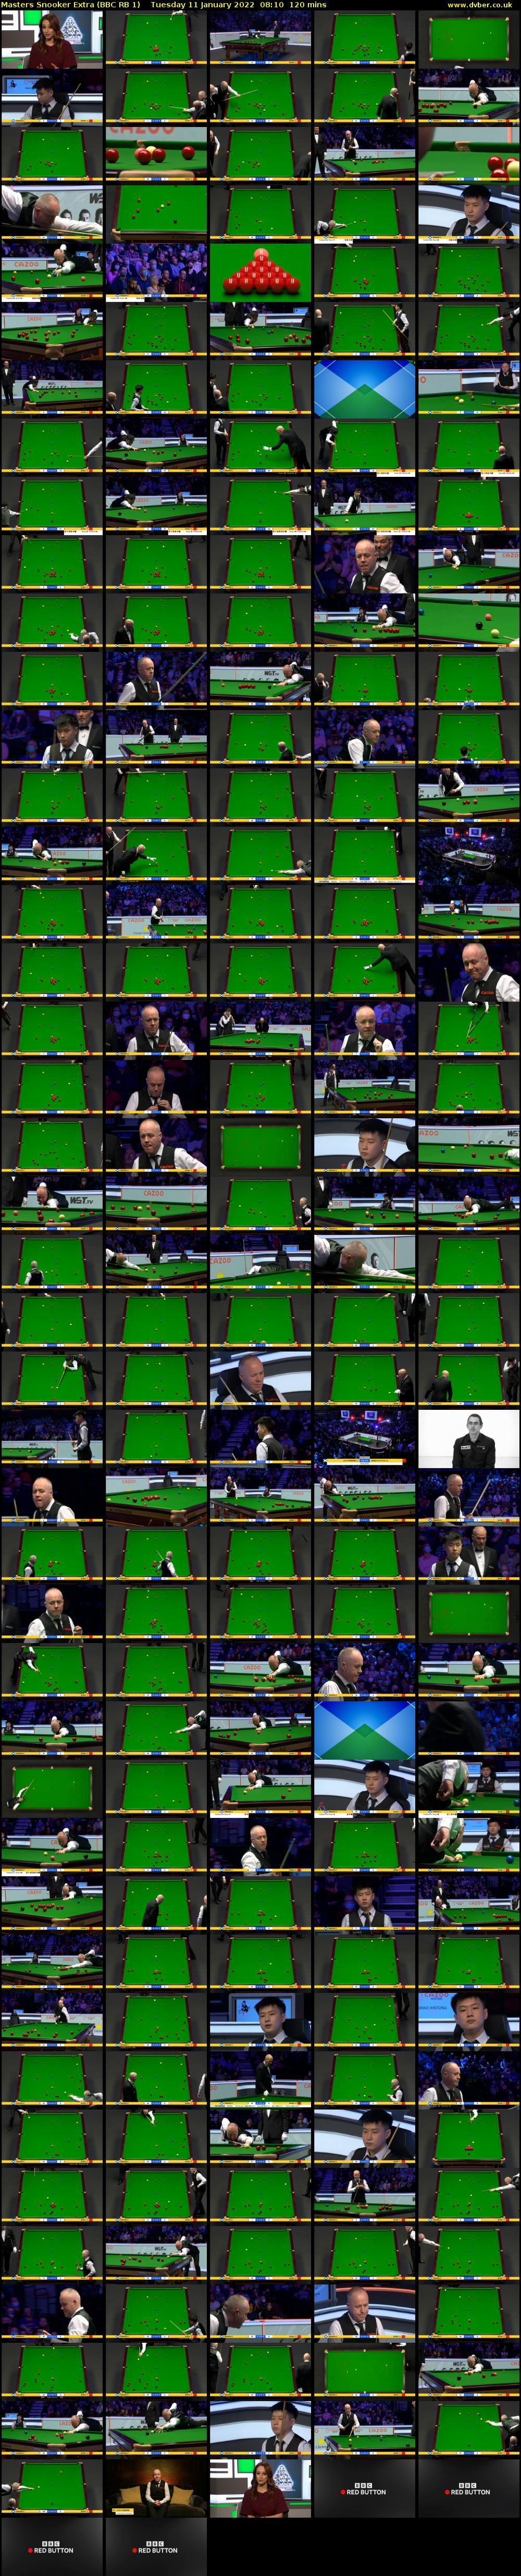 Masters Snooker Extra (BBC RB 1) Tuesday 11 January 2022 08:10 - 10:10